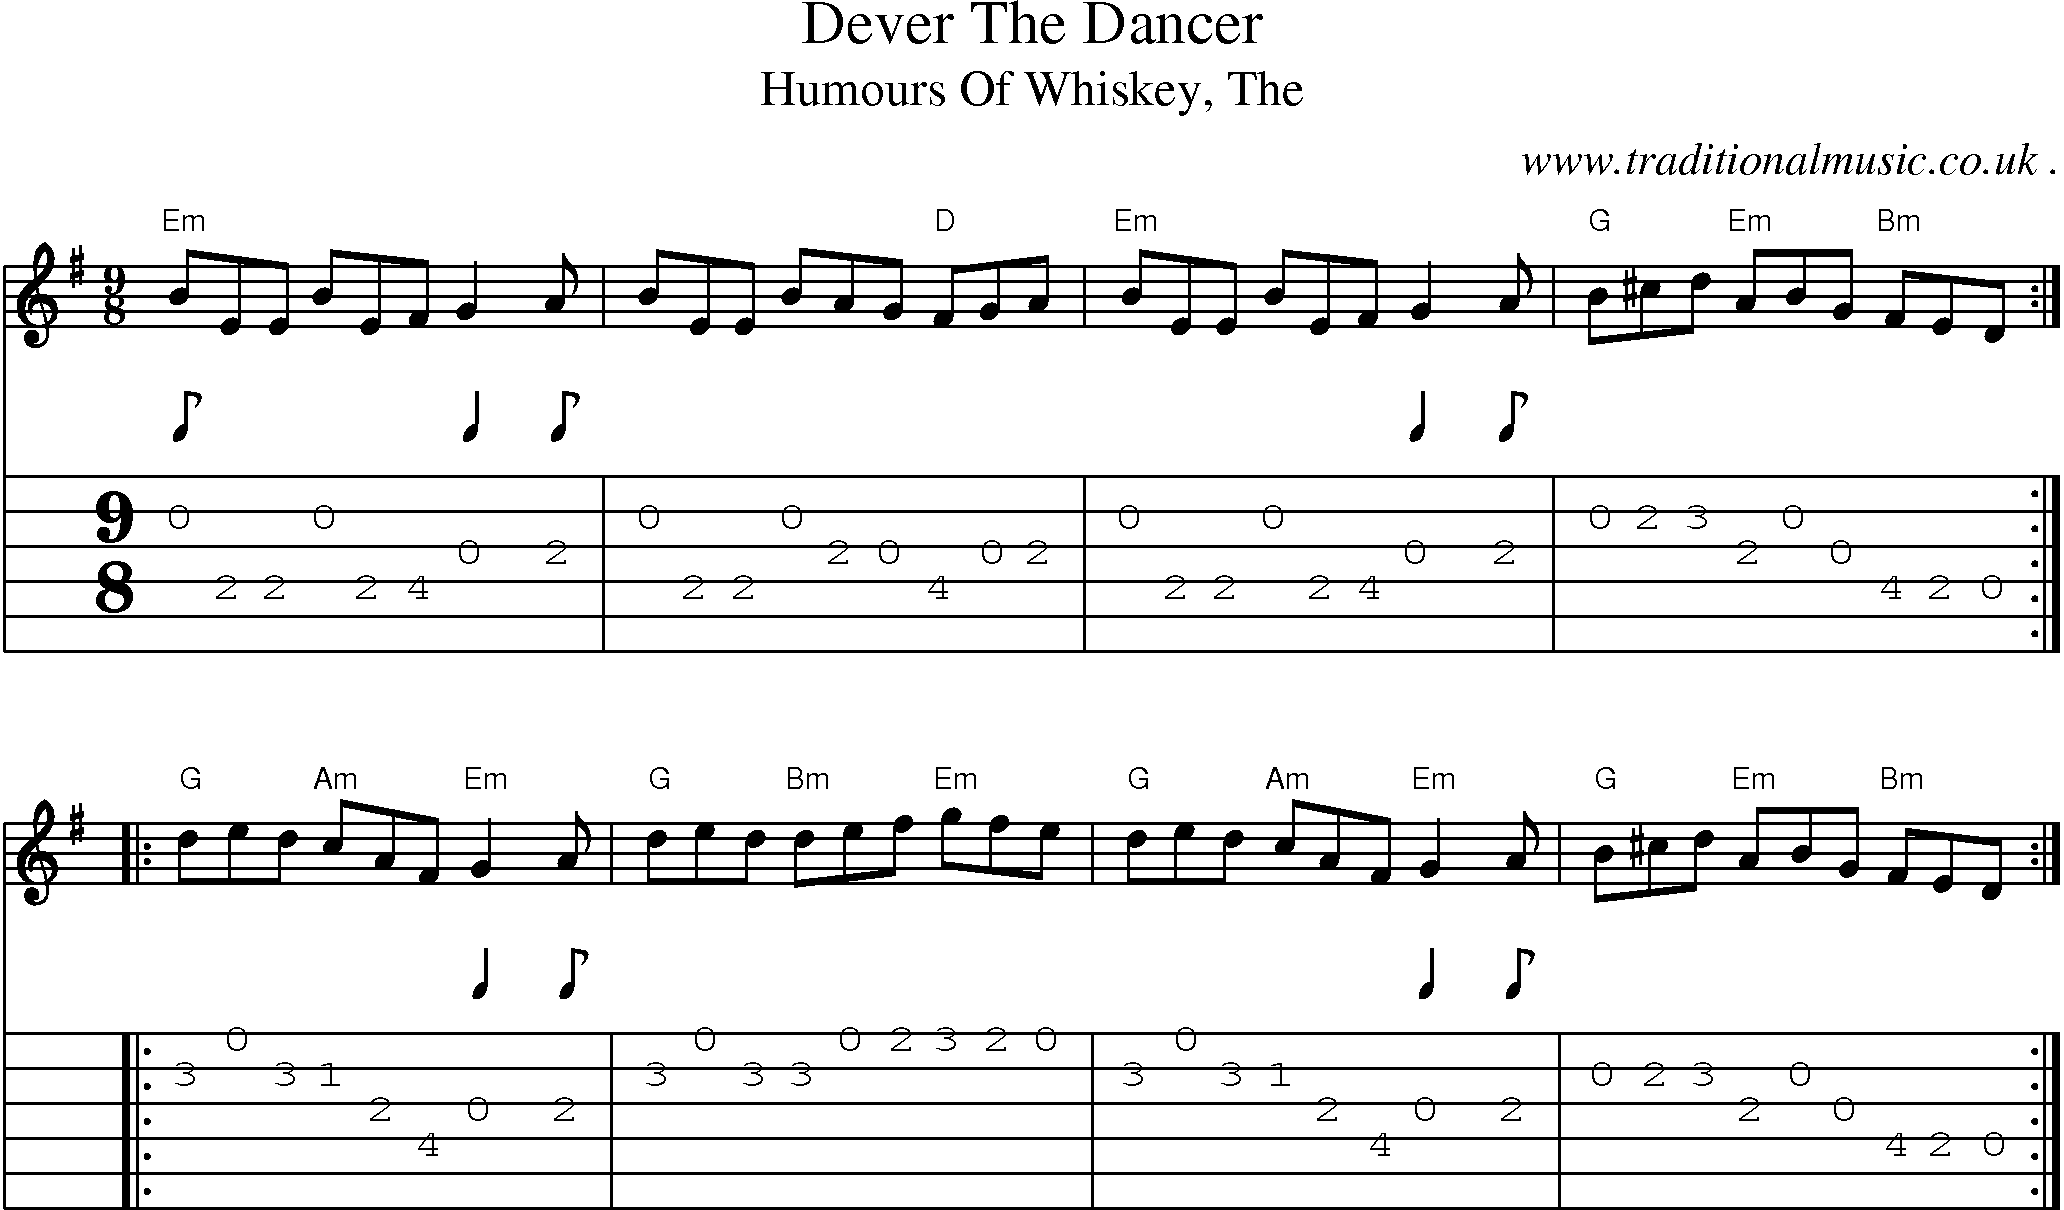 Music Score and Guitar Tabs for Dever The Dancer